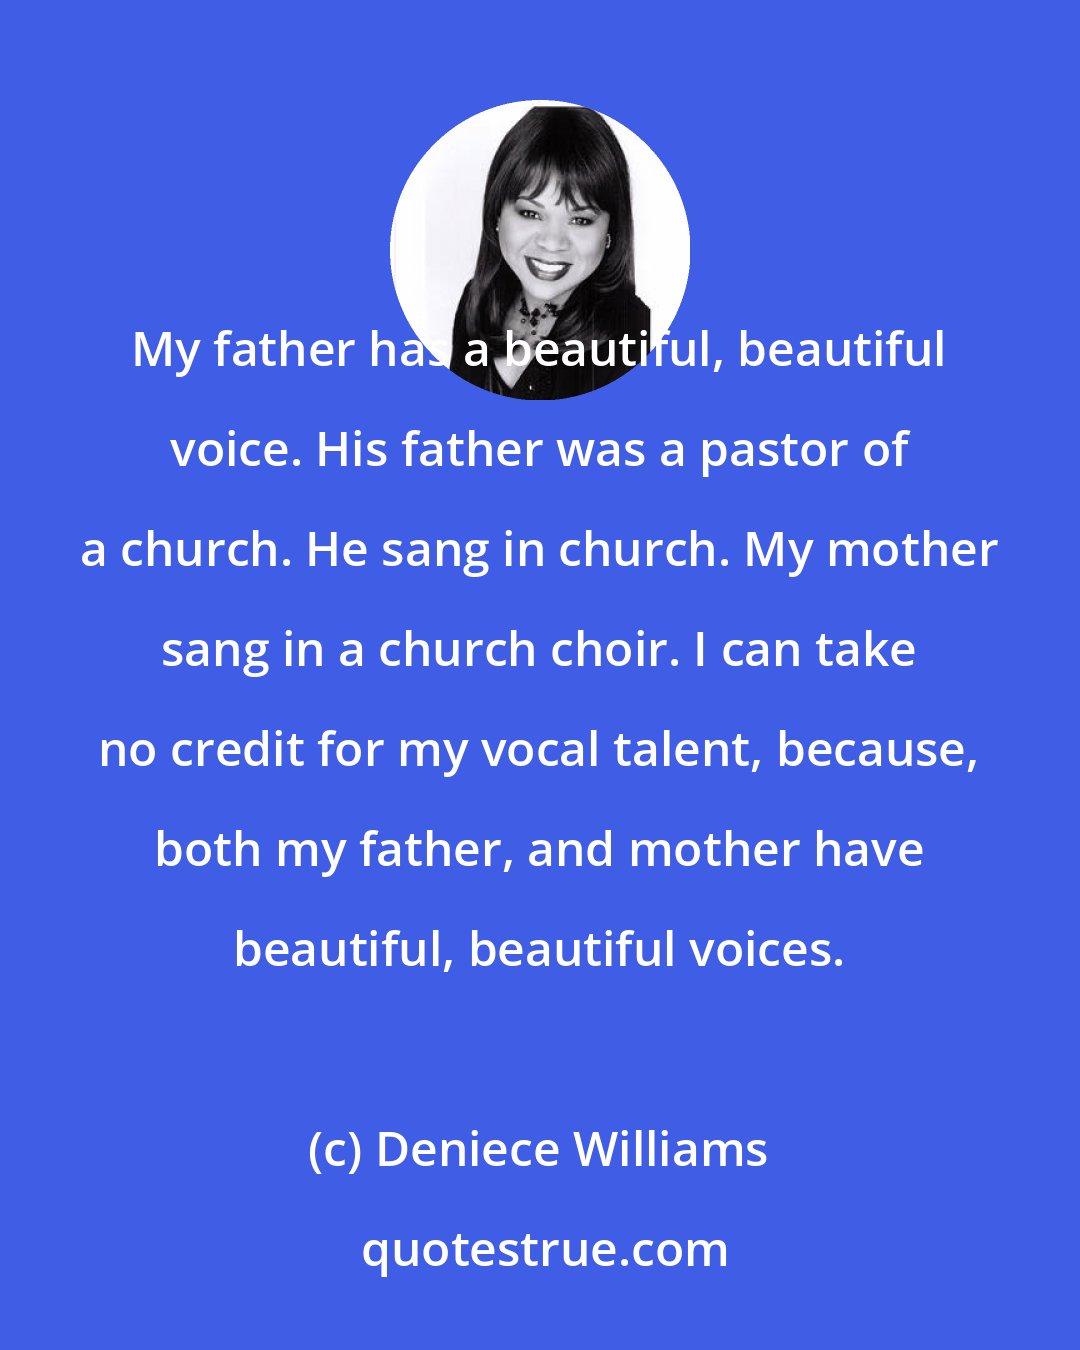 Deniece Williams: My father has a beautiful, beautiful voice. His father was a pastor of a church. He sang in church. My mother sang in a church choir. I can take no credit for my vocal talent, because, both my father, and mother have beautiful, beautiful voices.